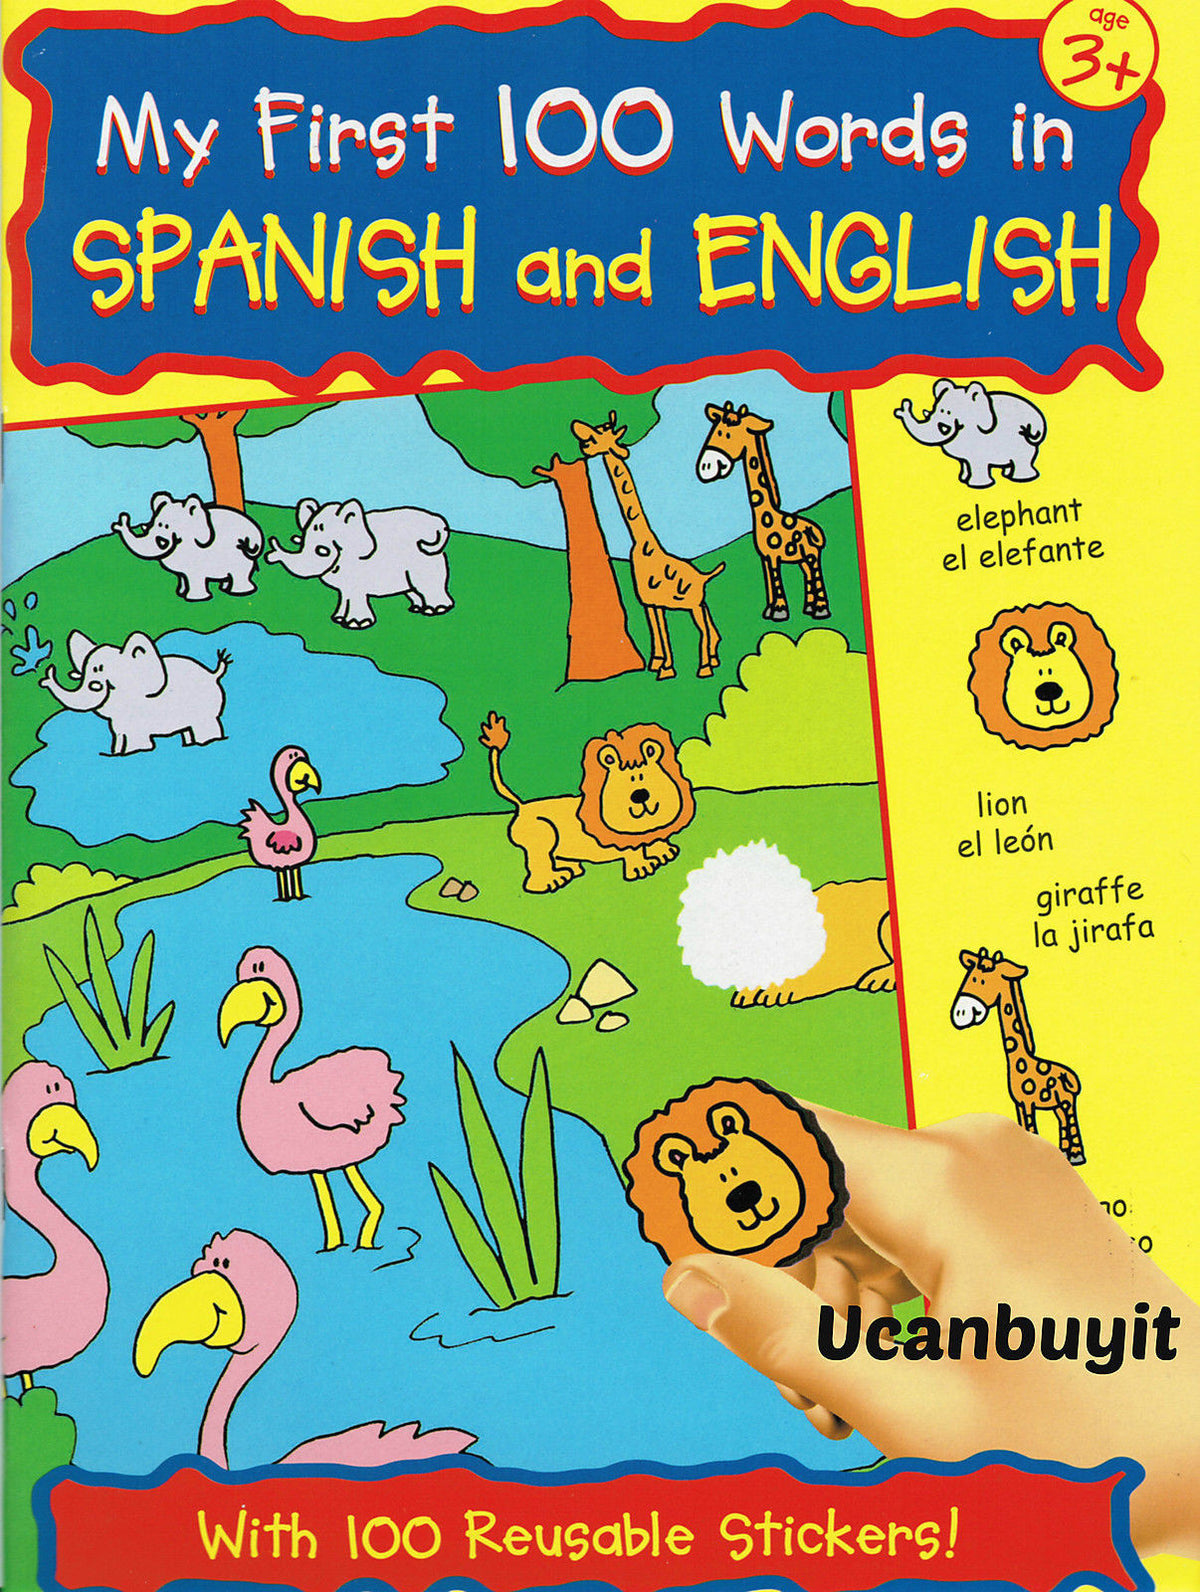 MY FIRST 100 WORDS IN SPANISH & ENGLISH Activity Book w/Reusable Stickers Age 3+ - Teacher In Spanish